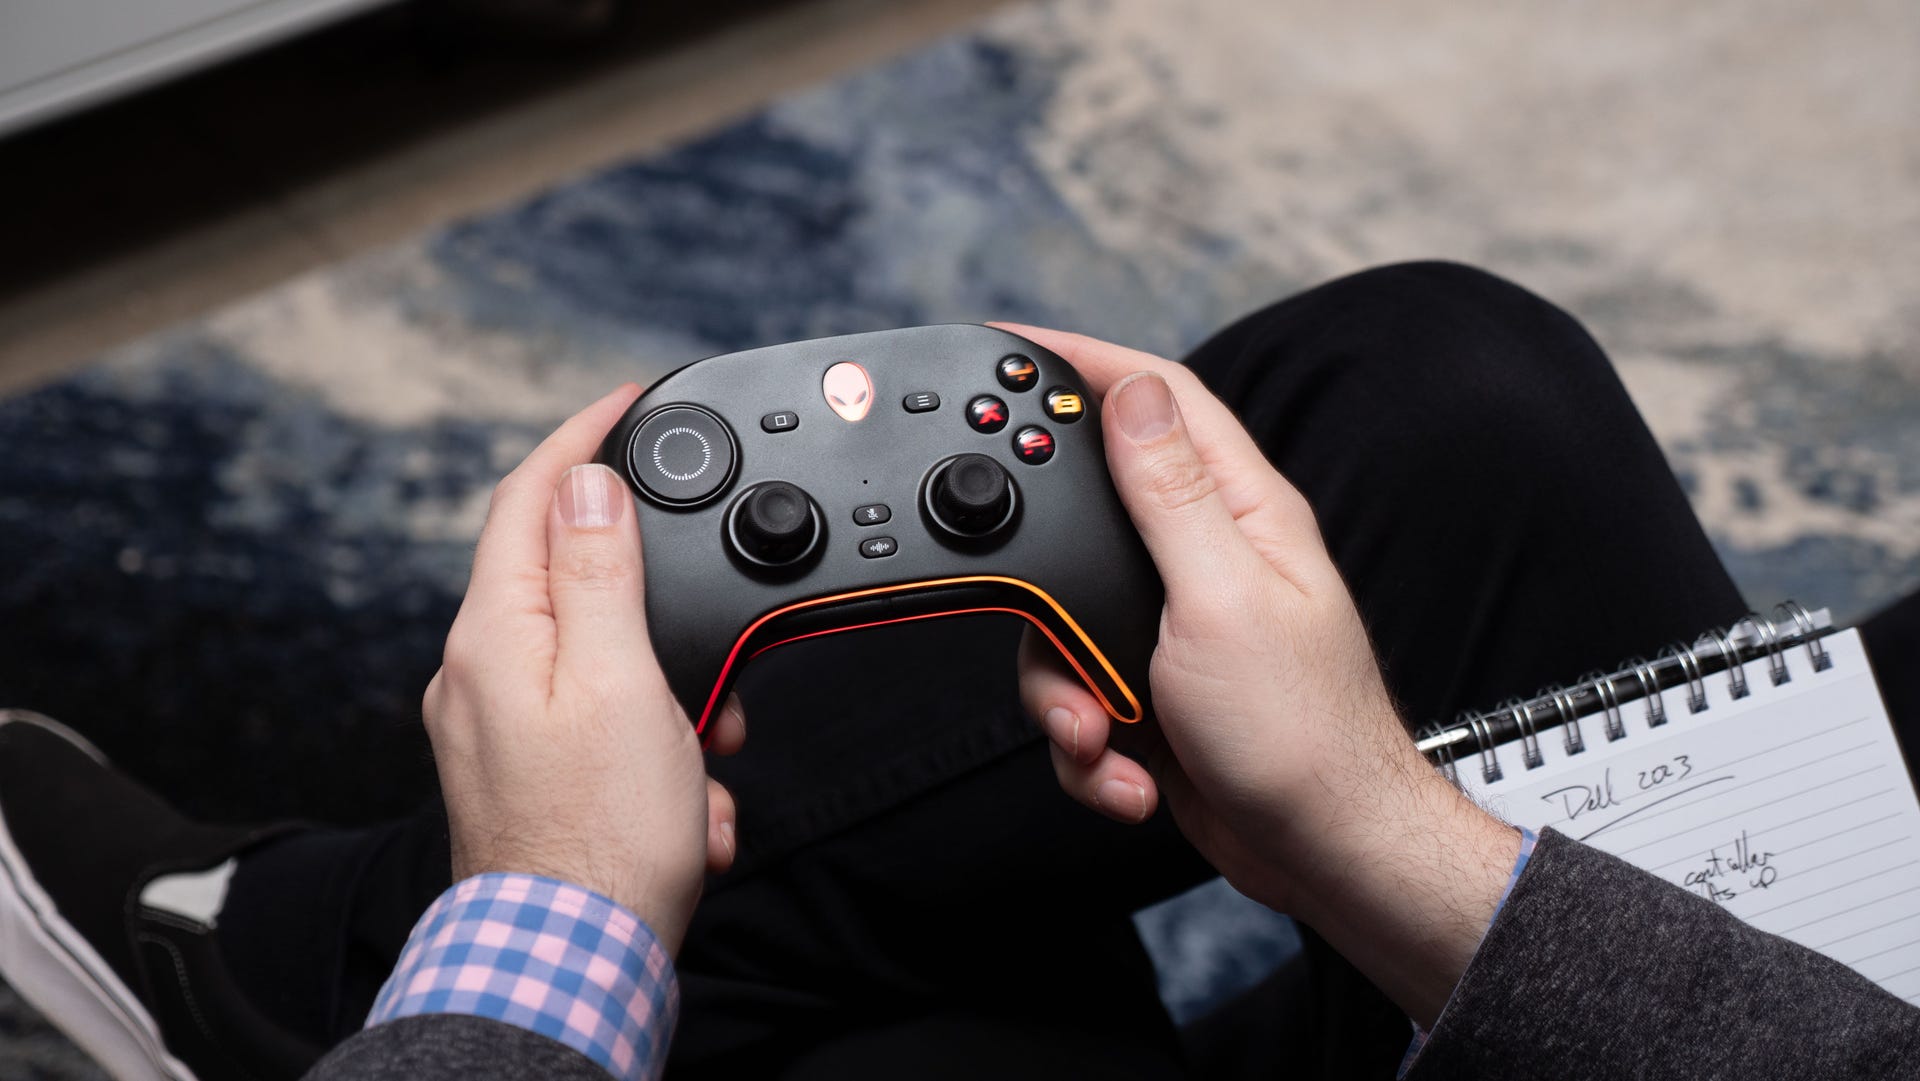 hands holding a black gaming controller with Dell's Alienware logo as the center button